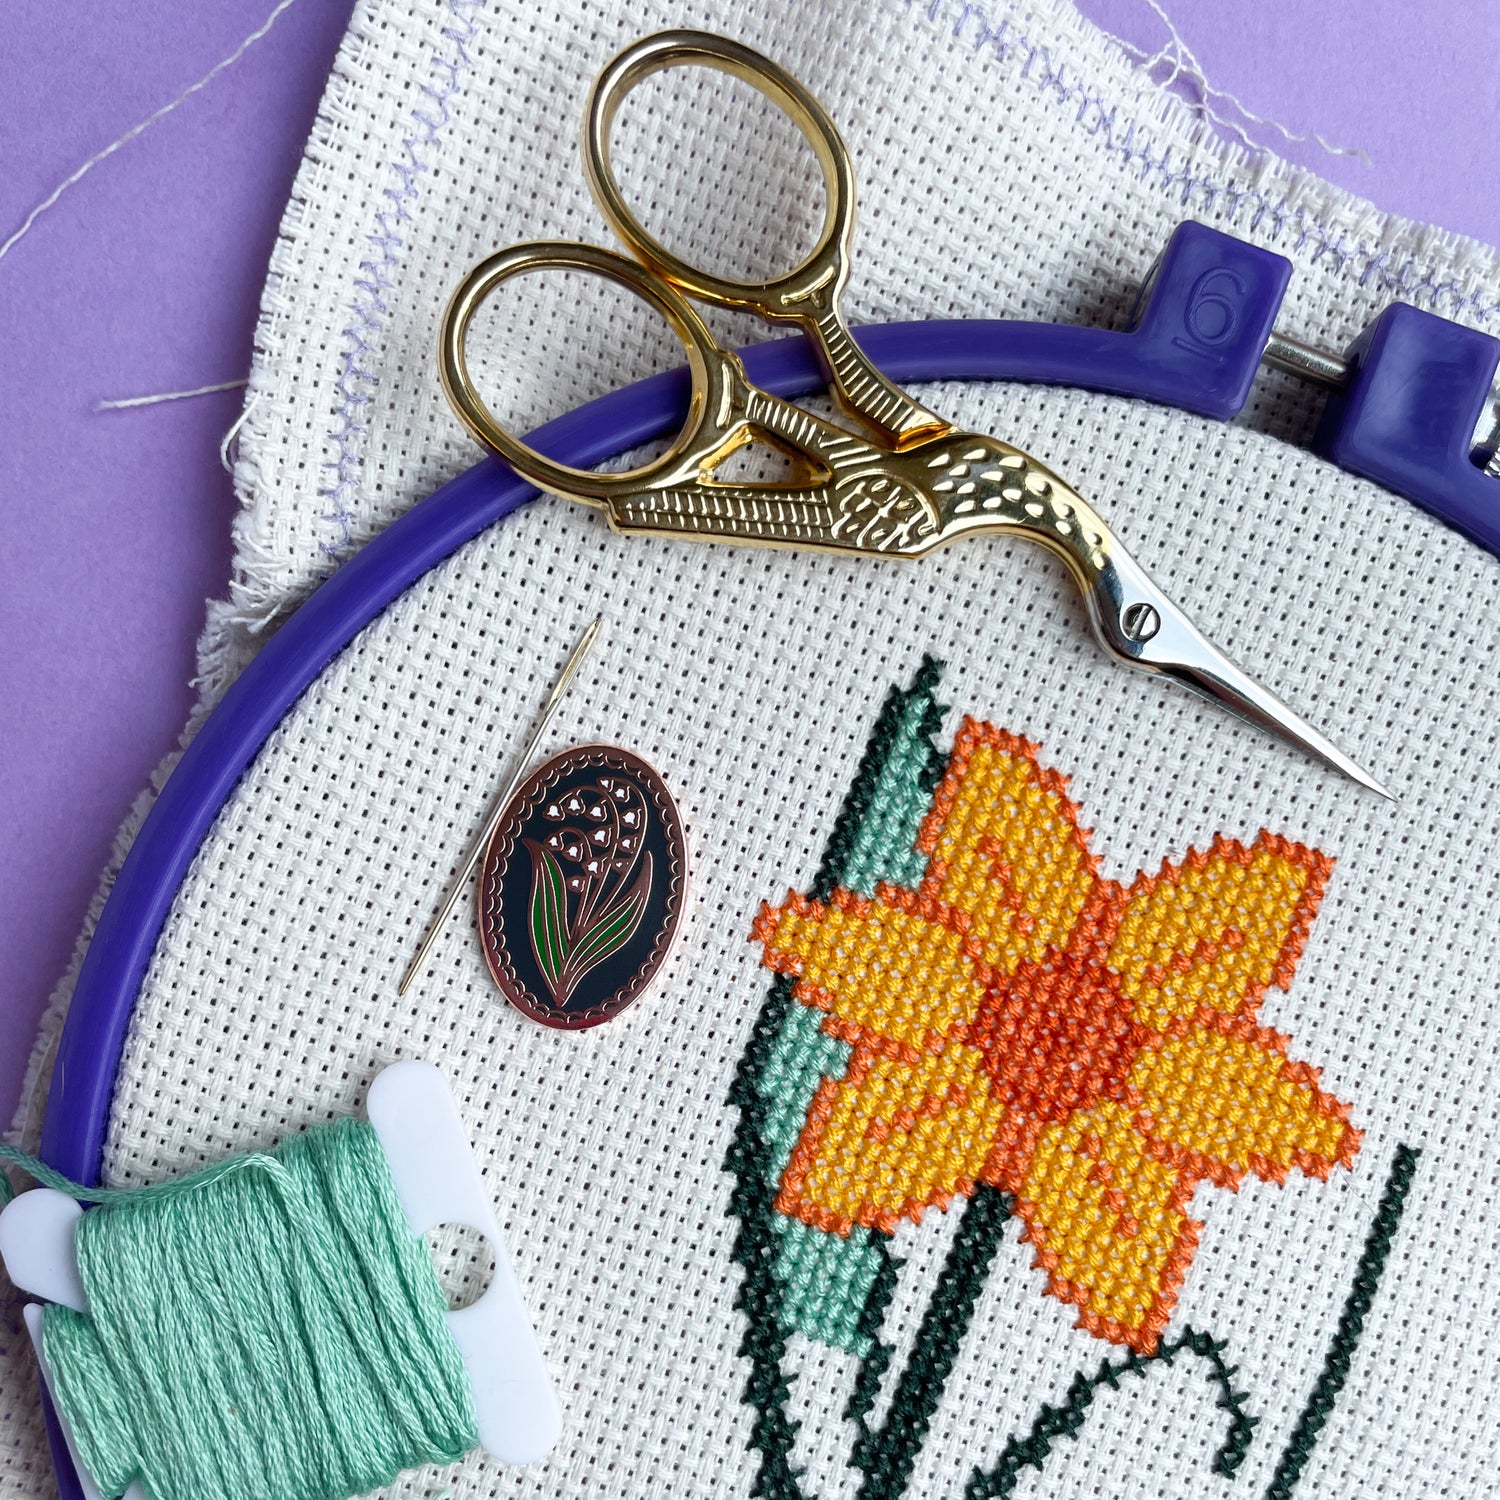 Embroidery Hoops and Cross Stitch Hoops by Celley